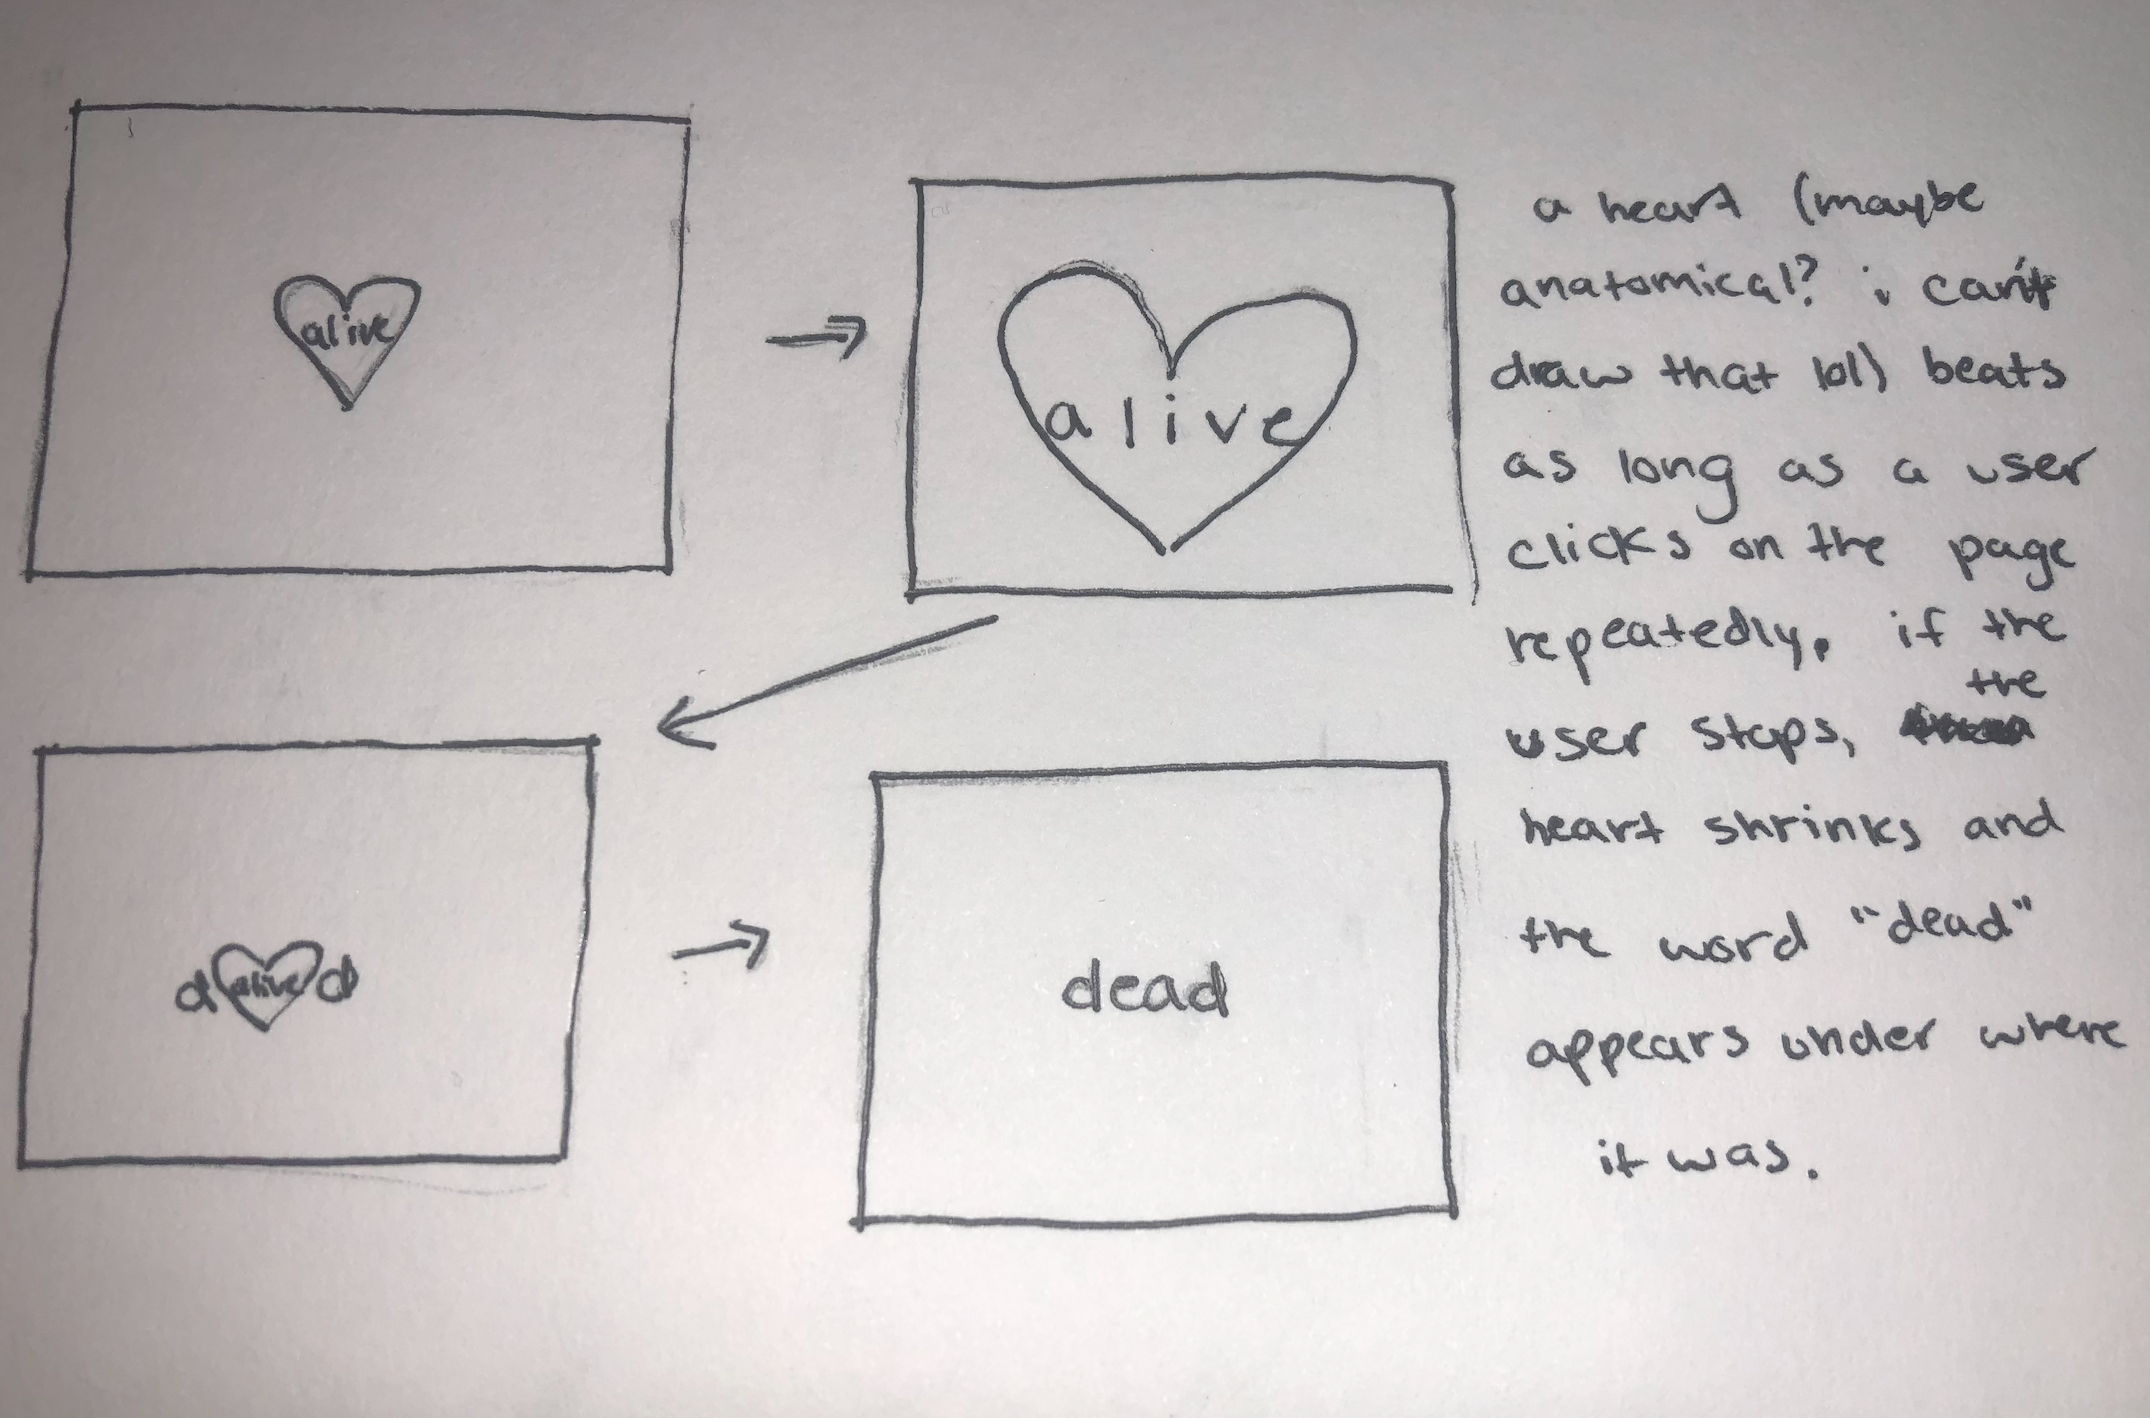 a drawing of a webpage where a heart beats as long as the user continuously clicks on the page. when the user ceases to click the word 'dead' appears on the screen